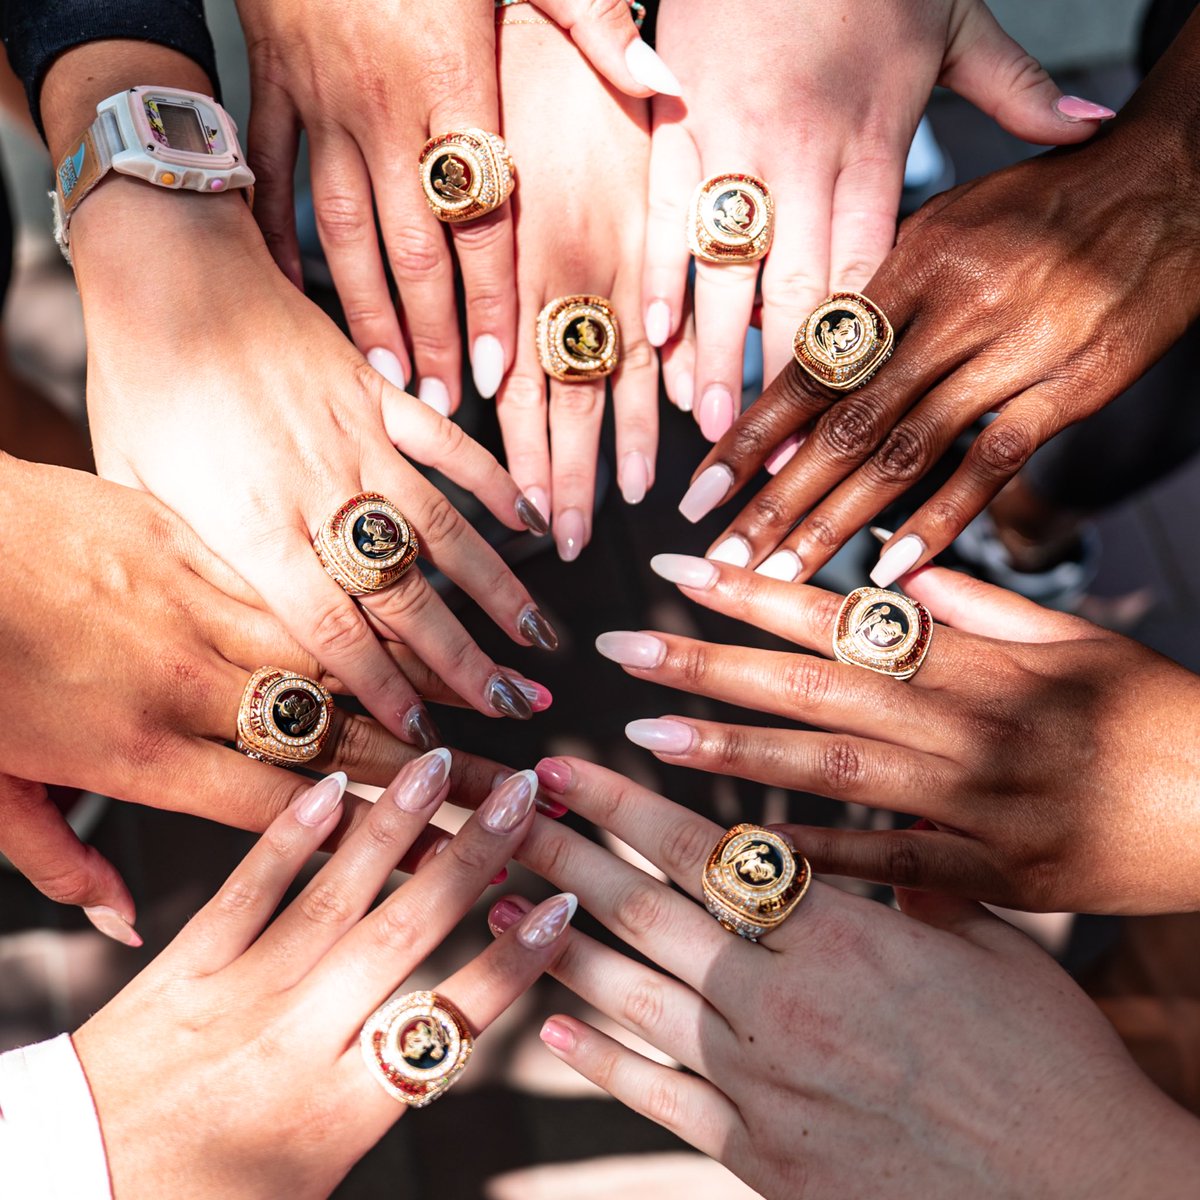 Had to put a 𝒓𝒊𝒏𝒈 𝒐𝒏 𝒊𝒕 We’re in love with our ACC Championship bling 💍 #OneTribe | #GoNoles